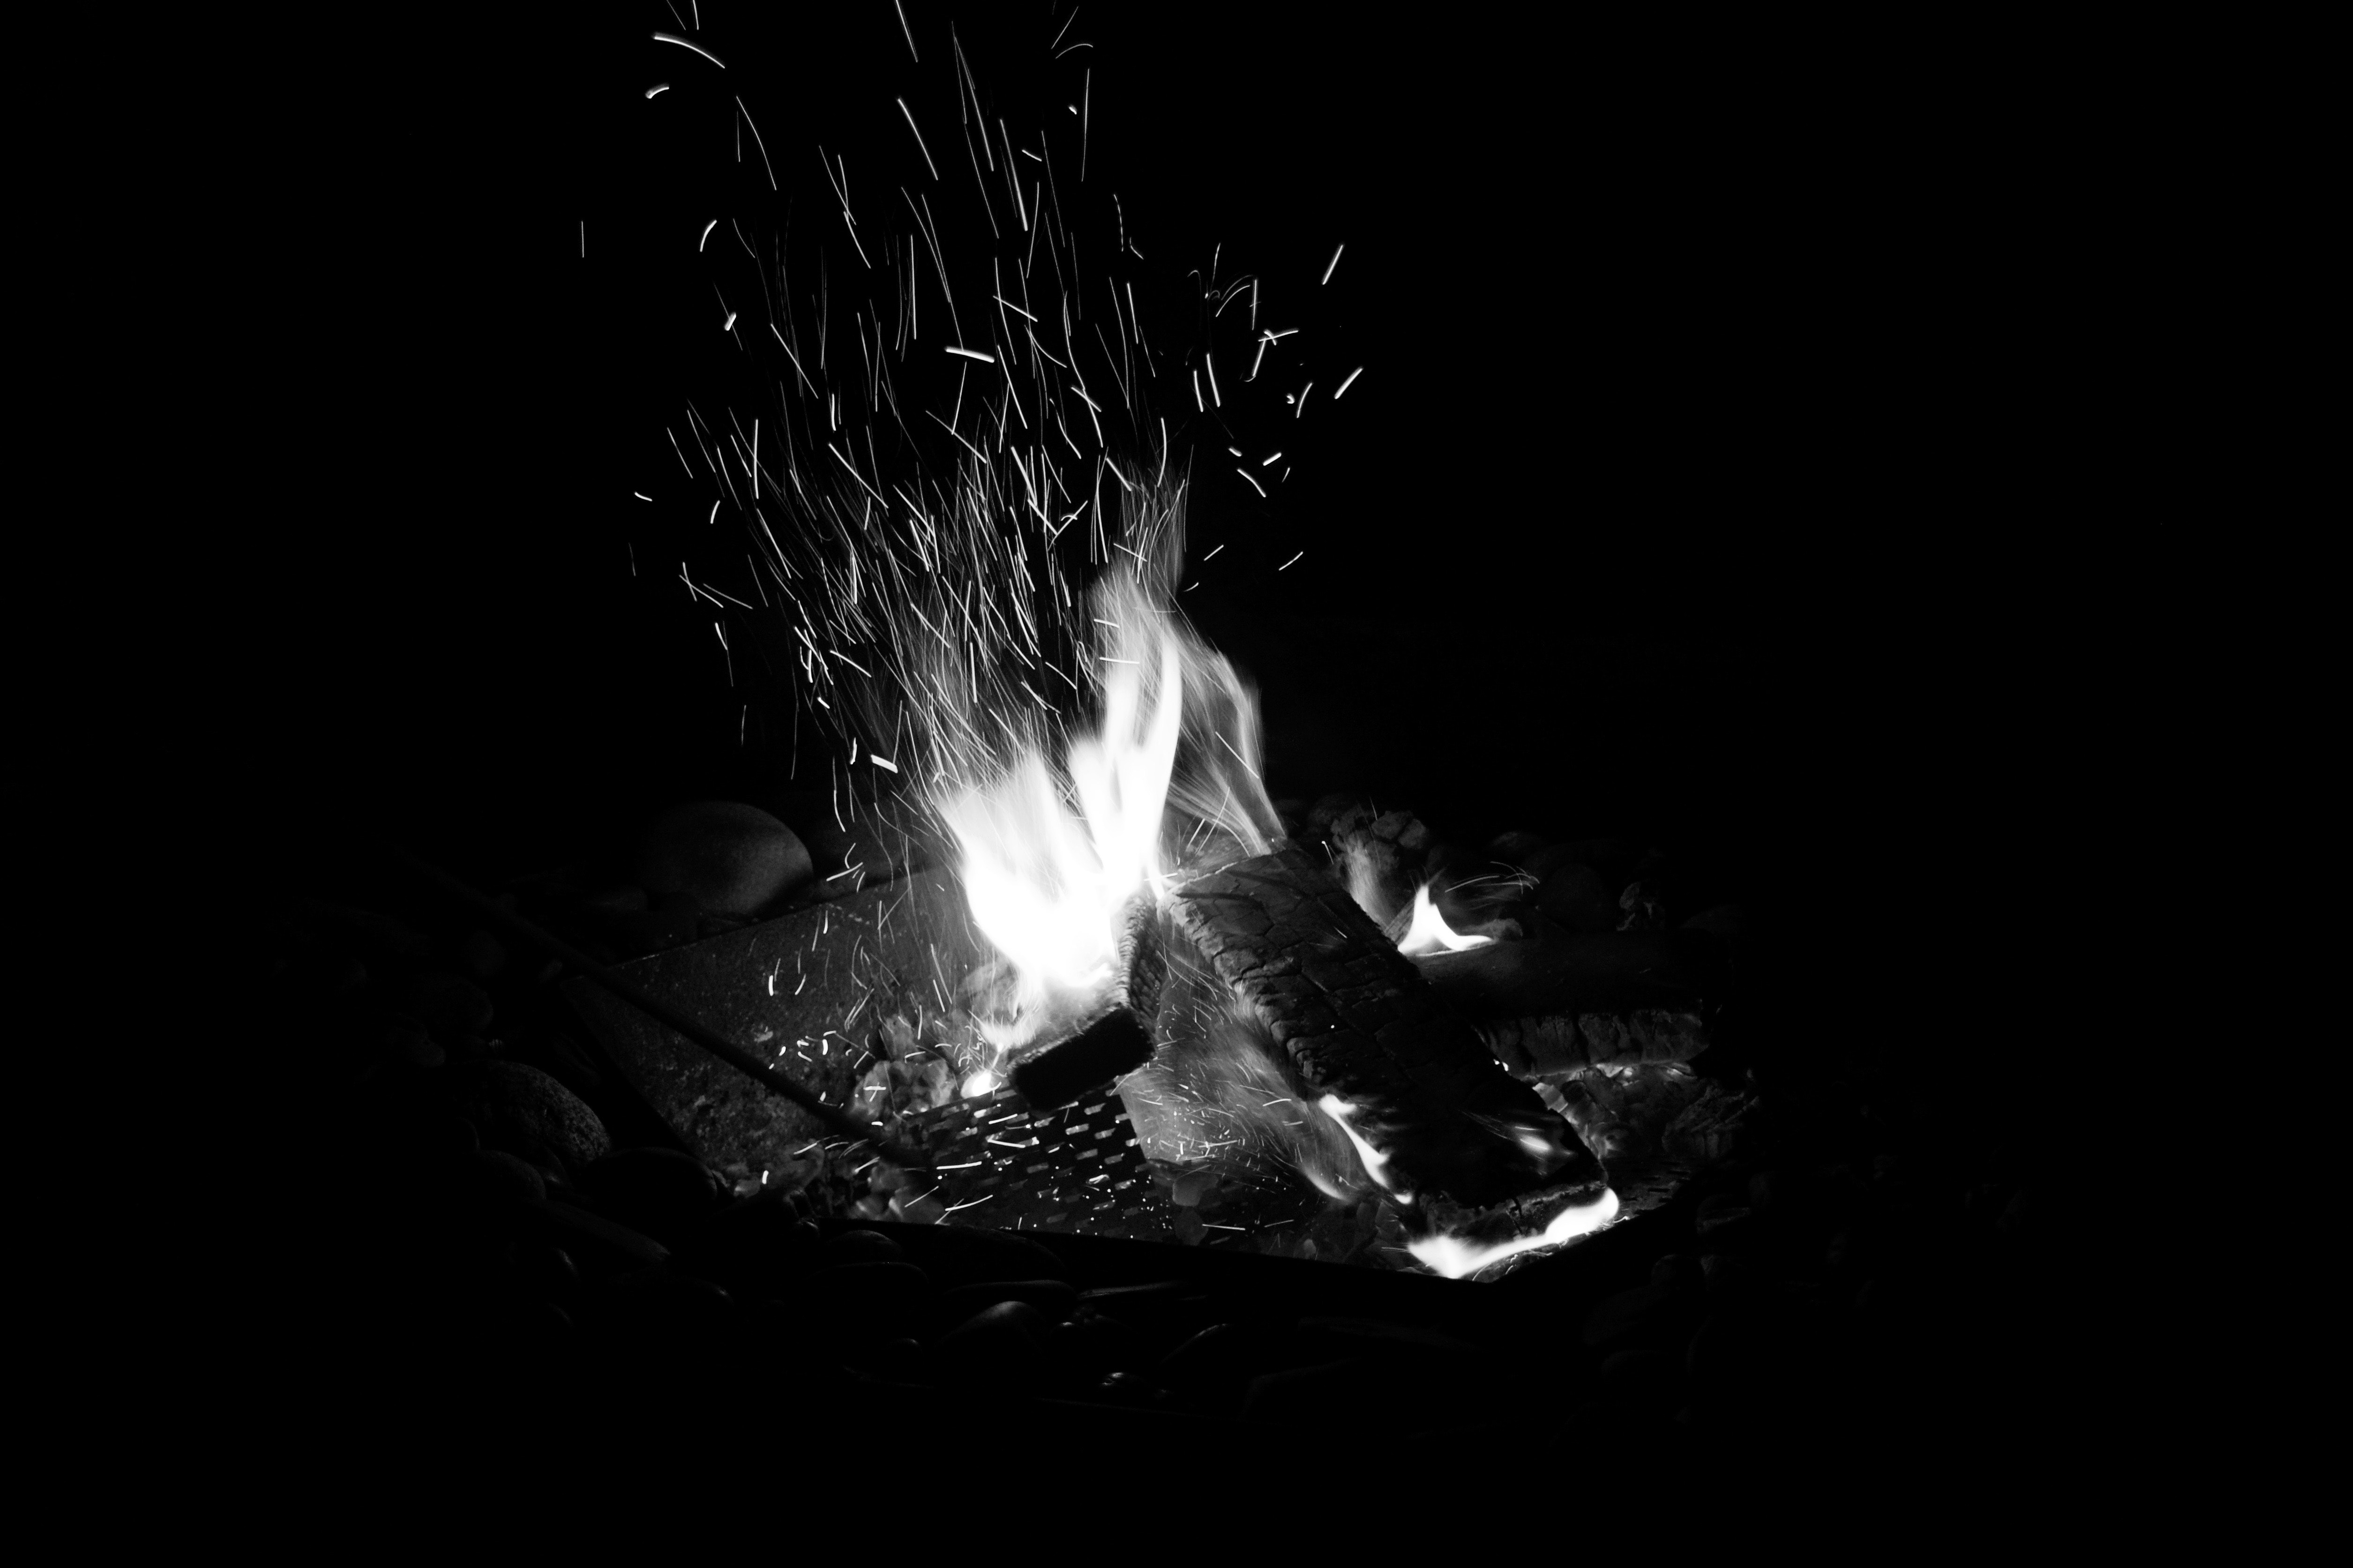 Camping fire during nighttime photo